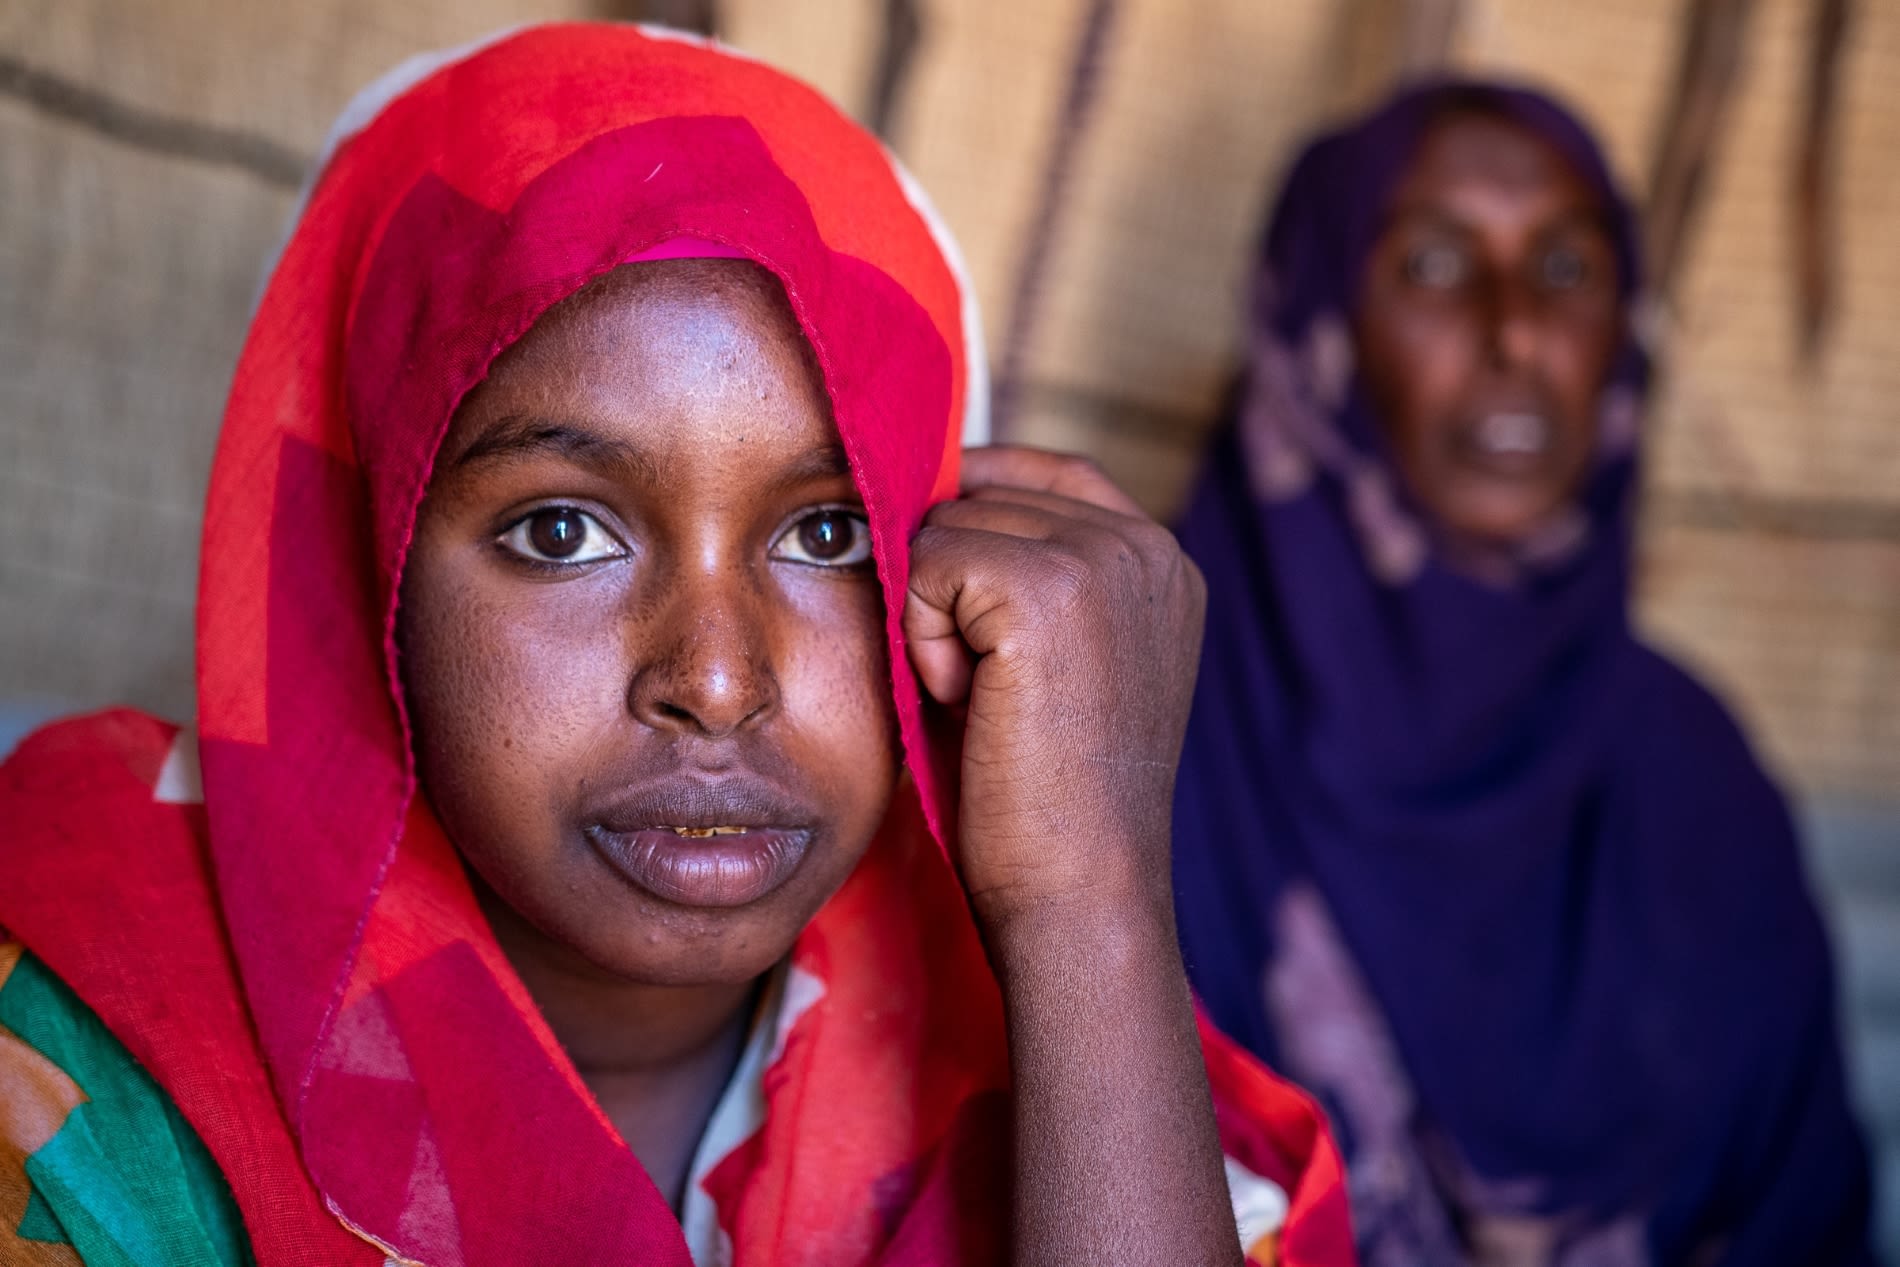 Ayan* (15) is pregnant with her first child and is receiving support from Save the Children's Family Health worker and clinic